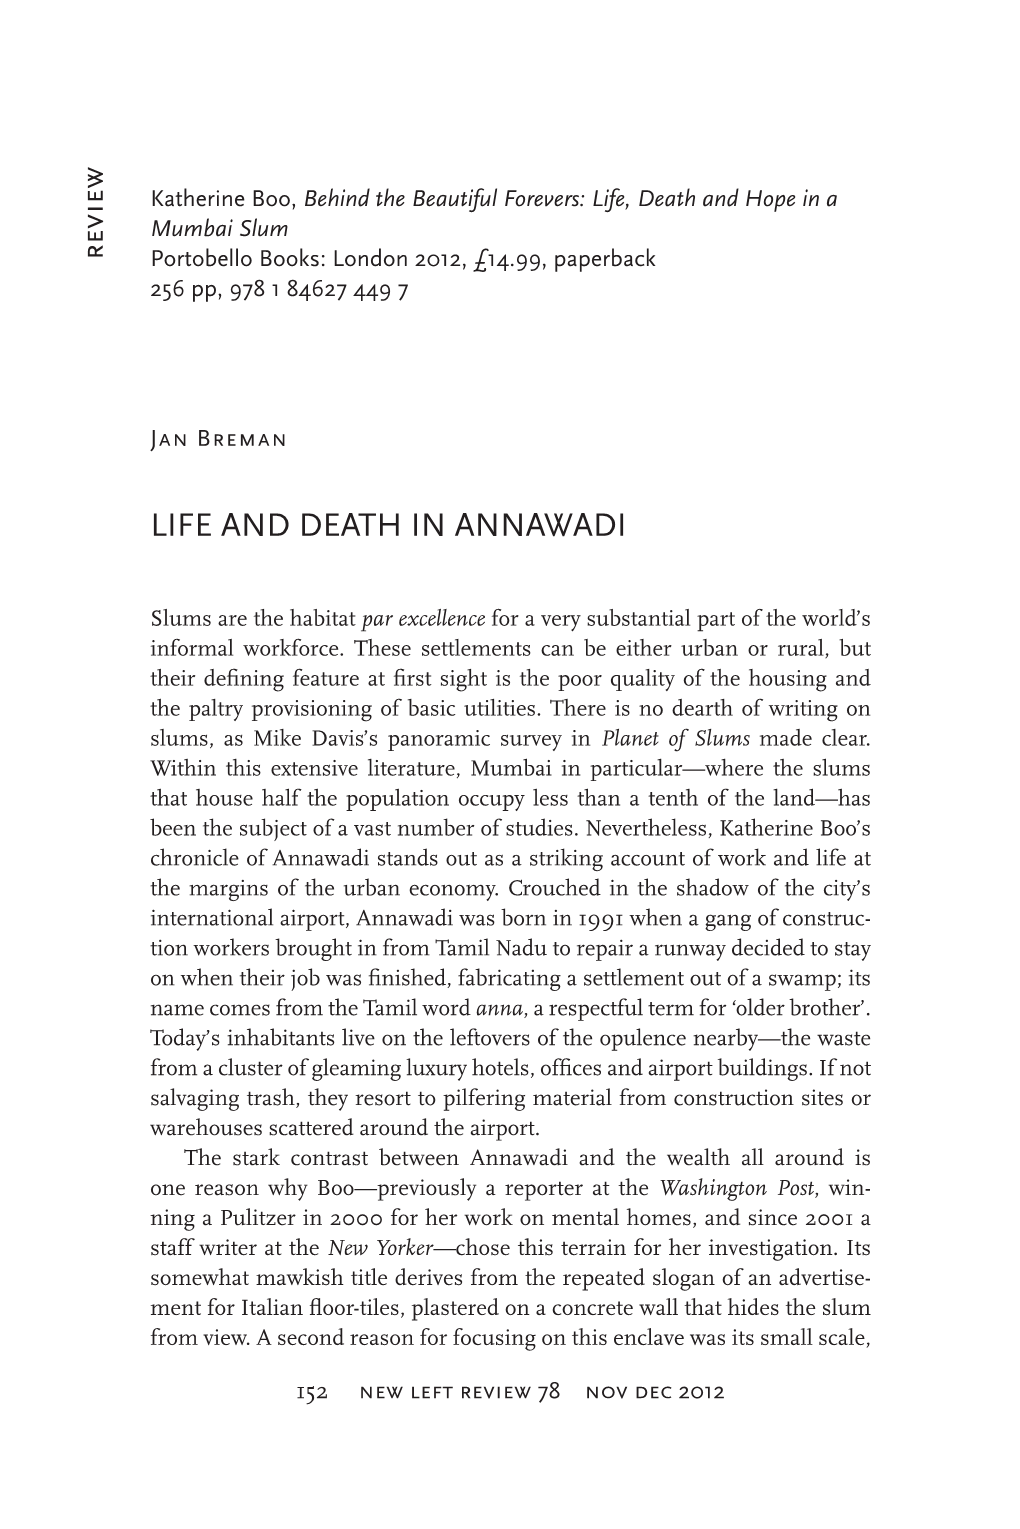 Life and Death in Annawadi